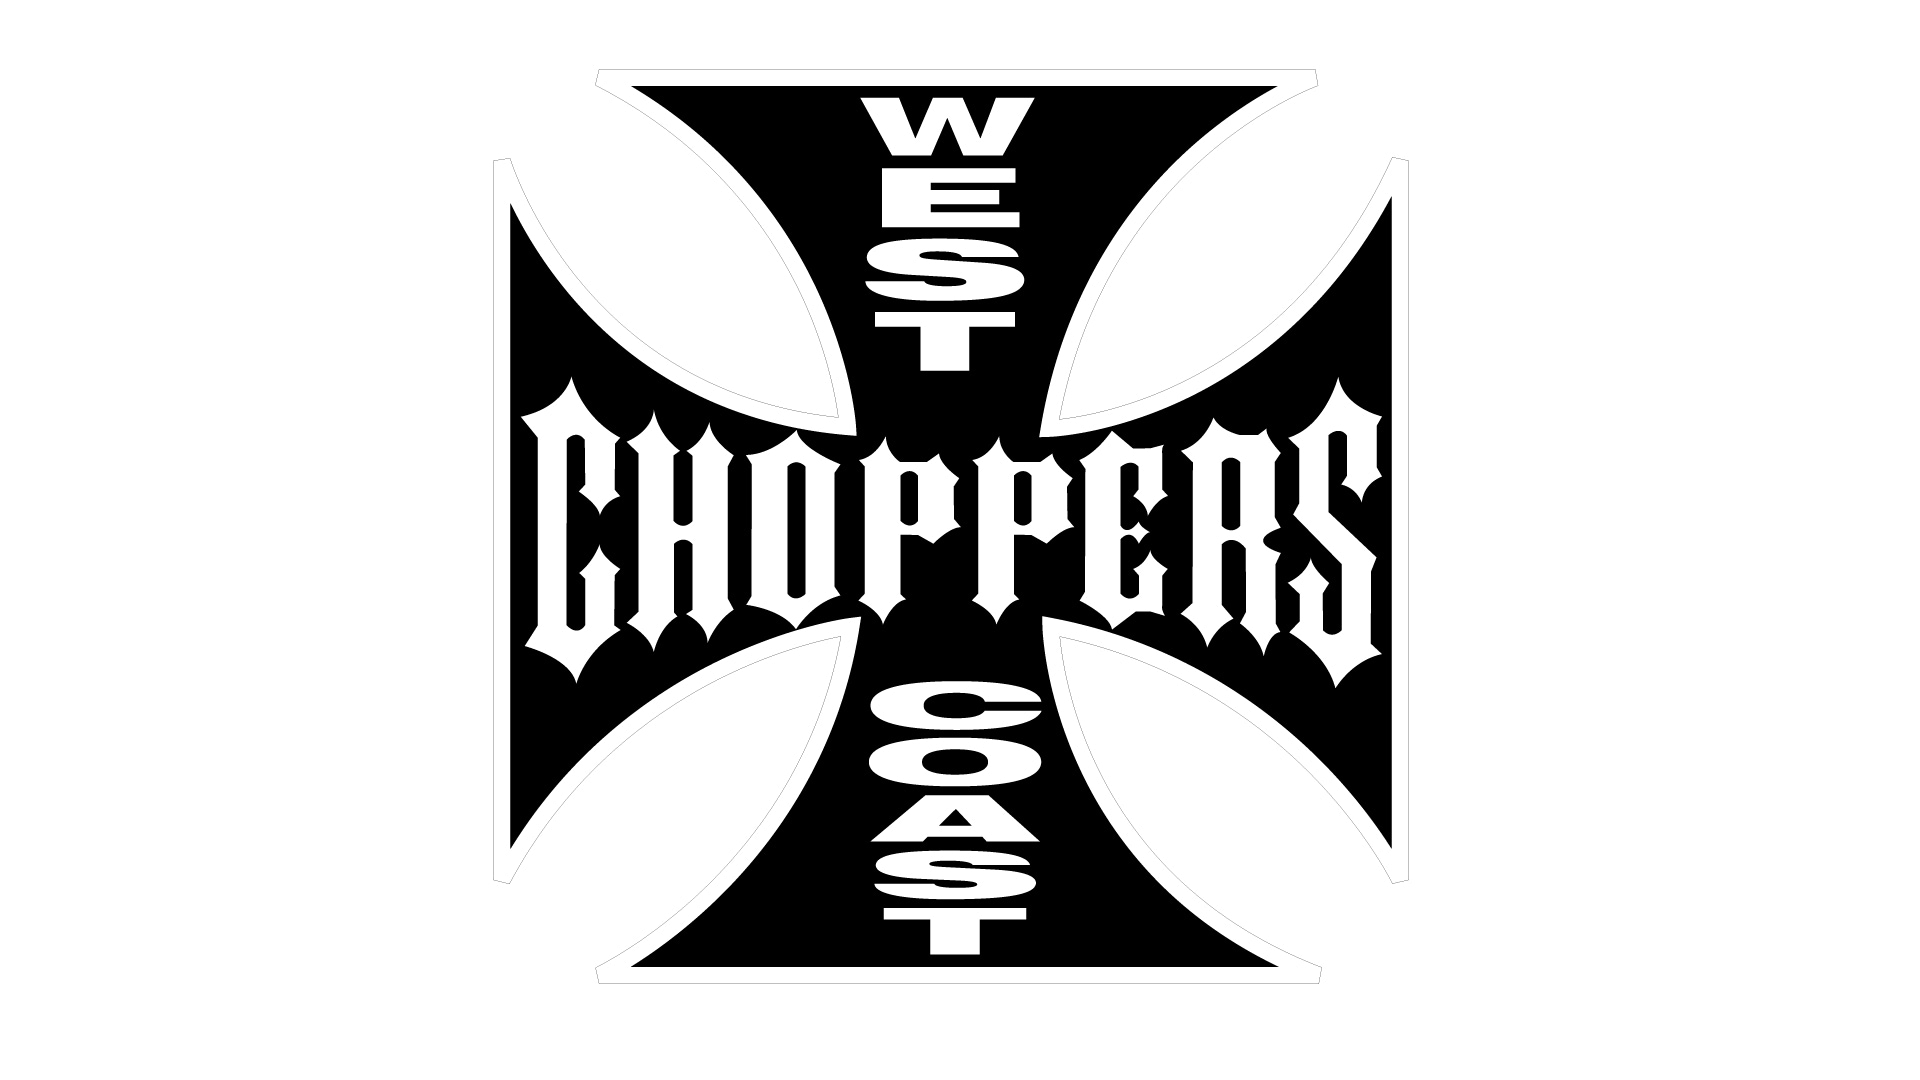 West Coast Choppers motorcycle logo history and Meaning, bike emblem